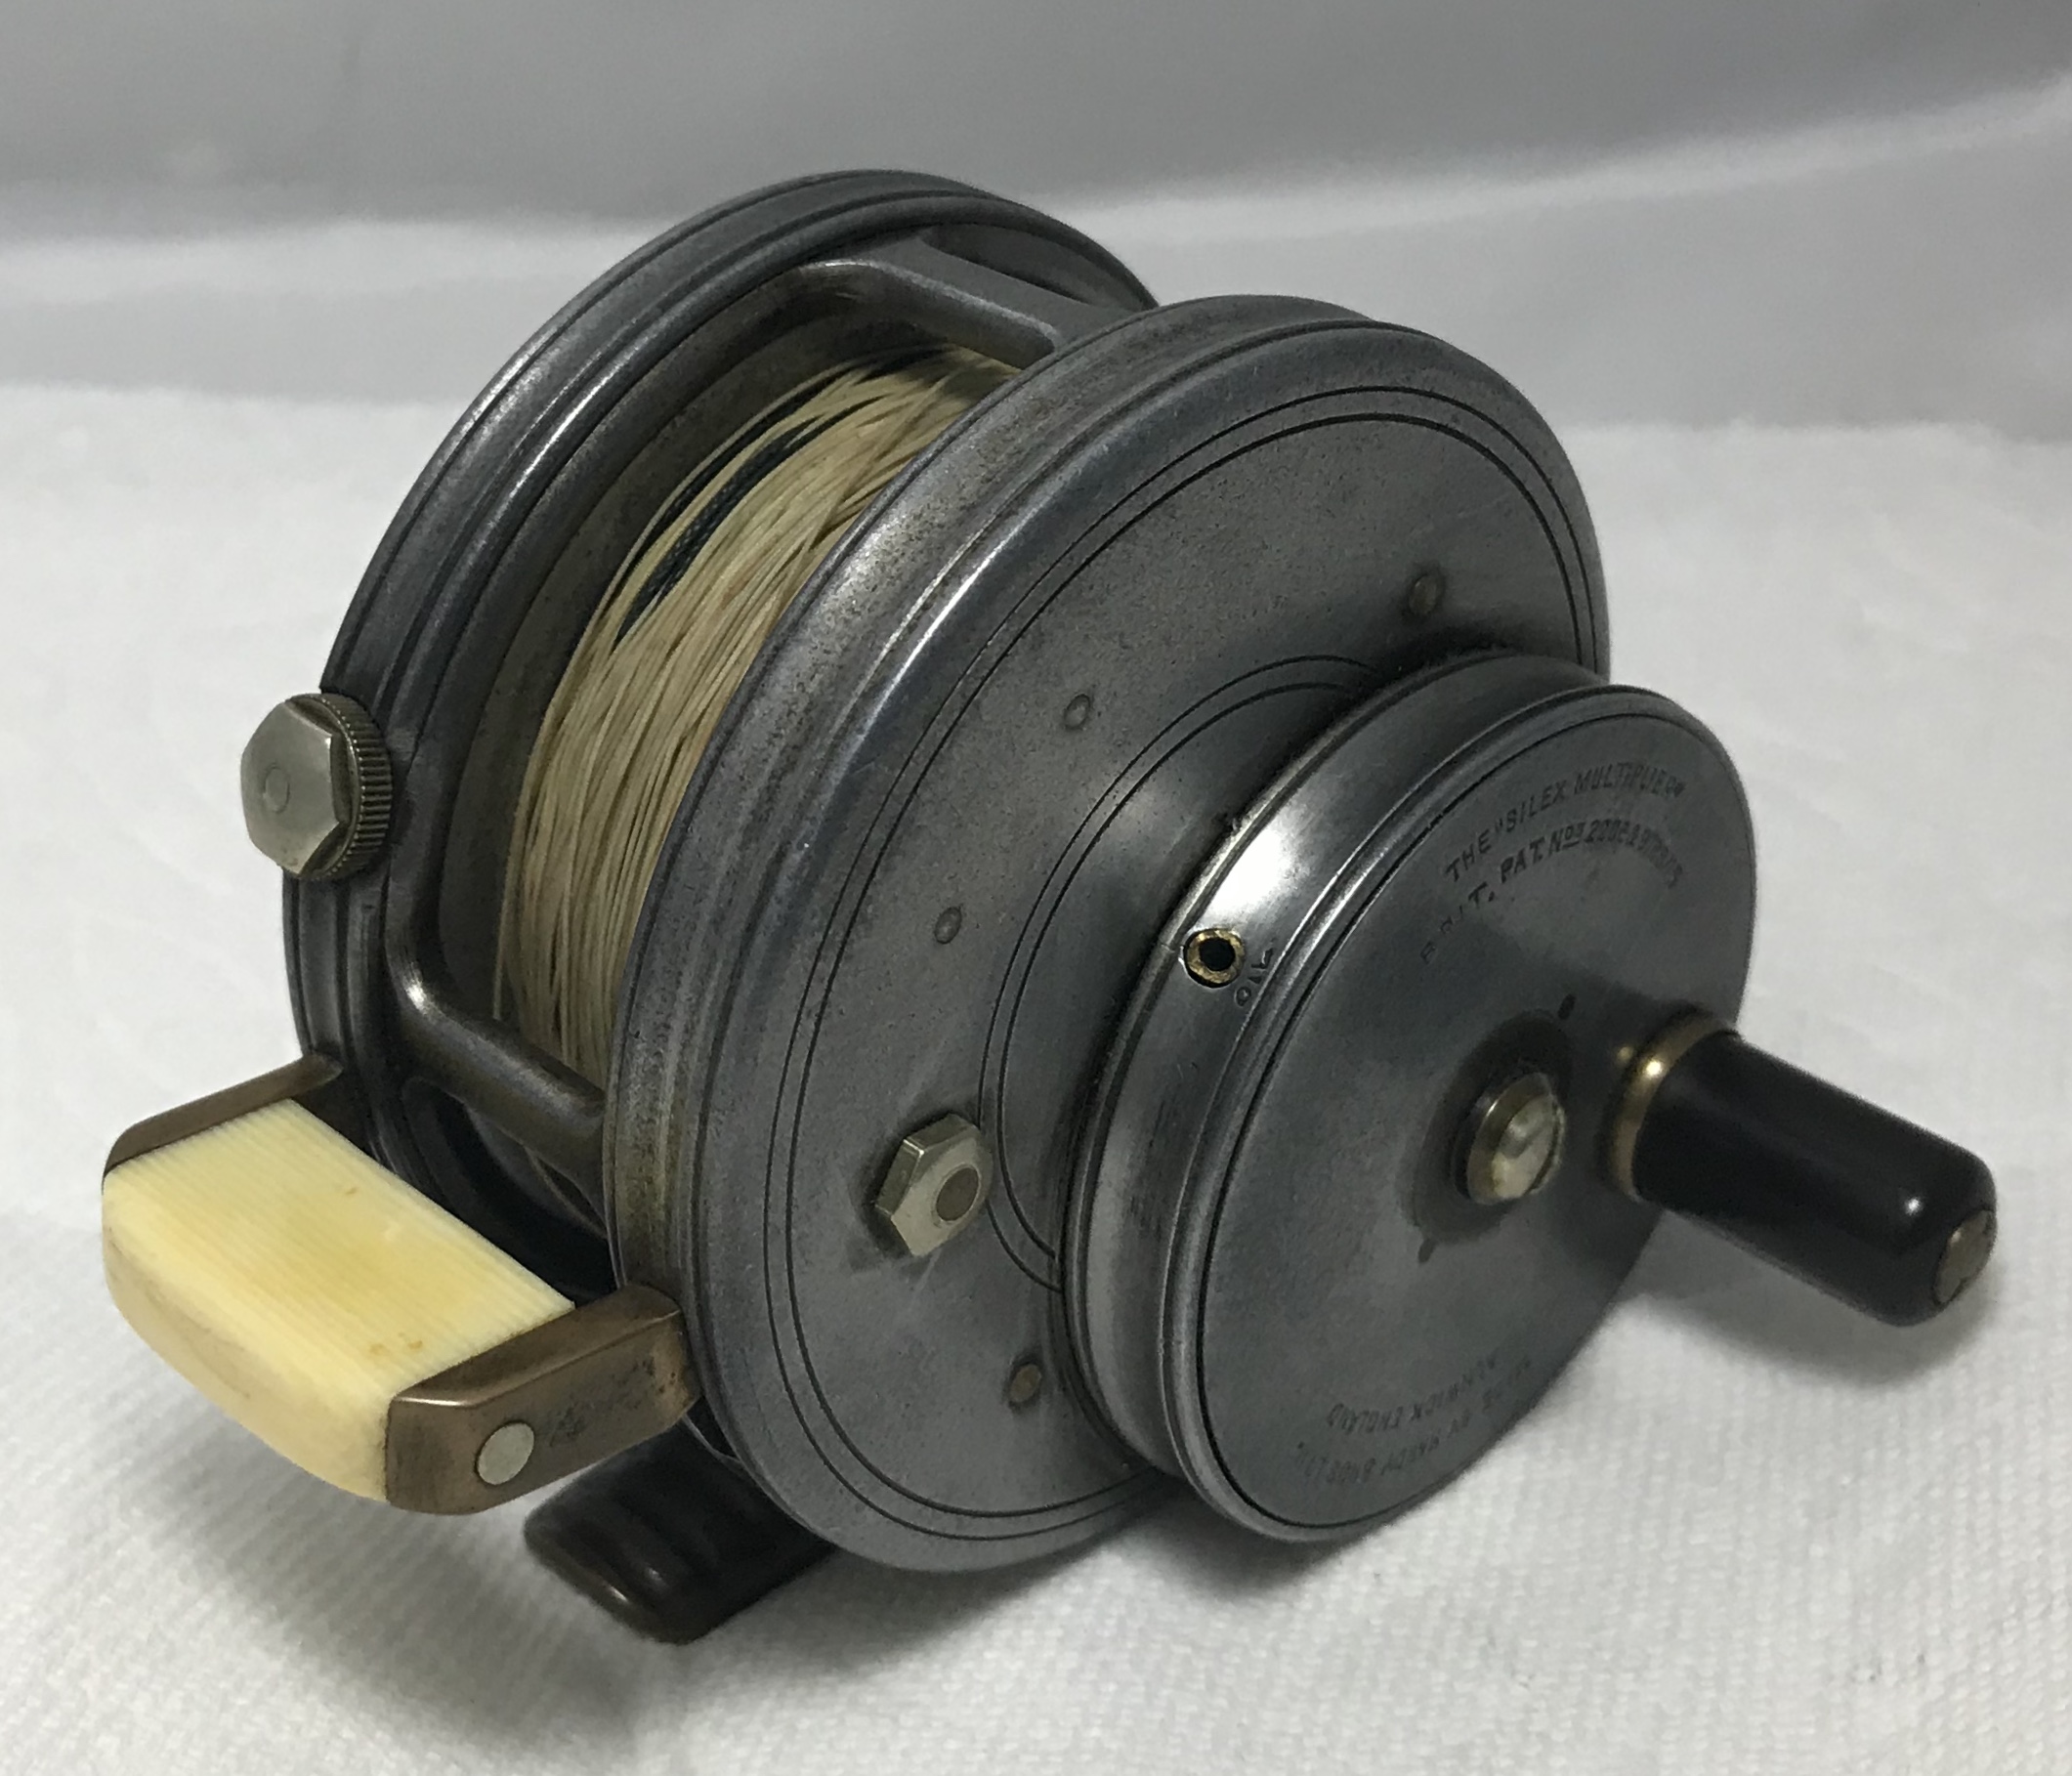 The 3 vintage tackle items you - Reel Talk - ORCA